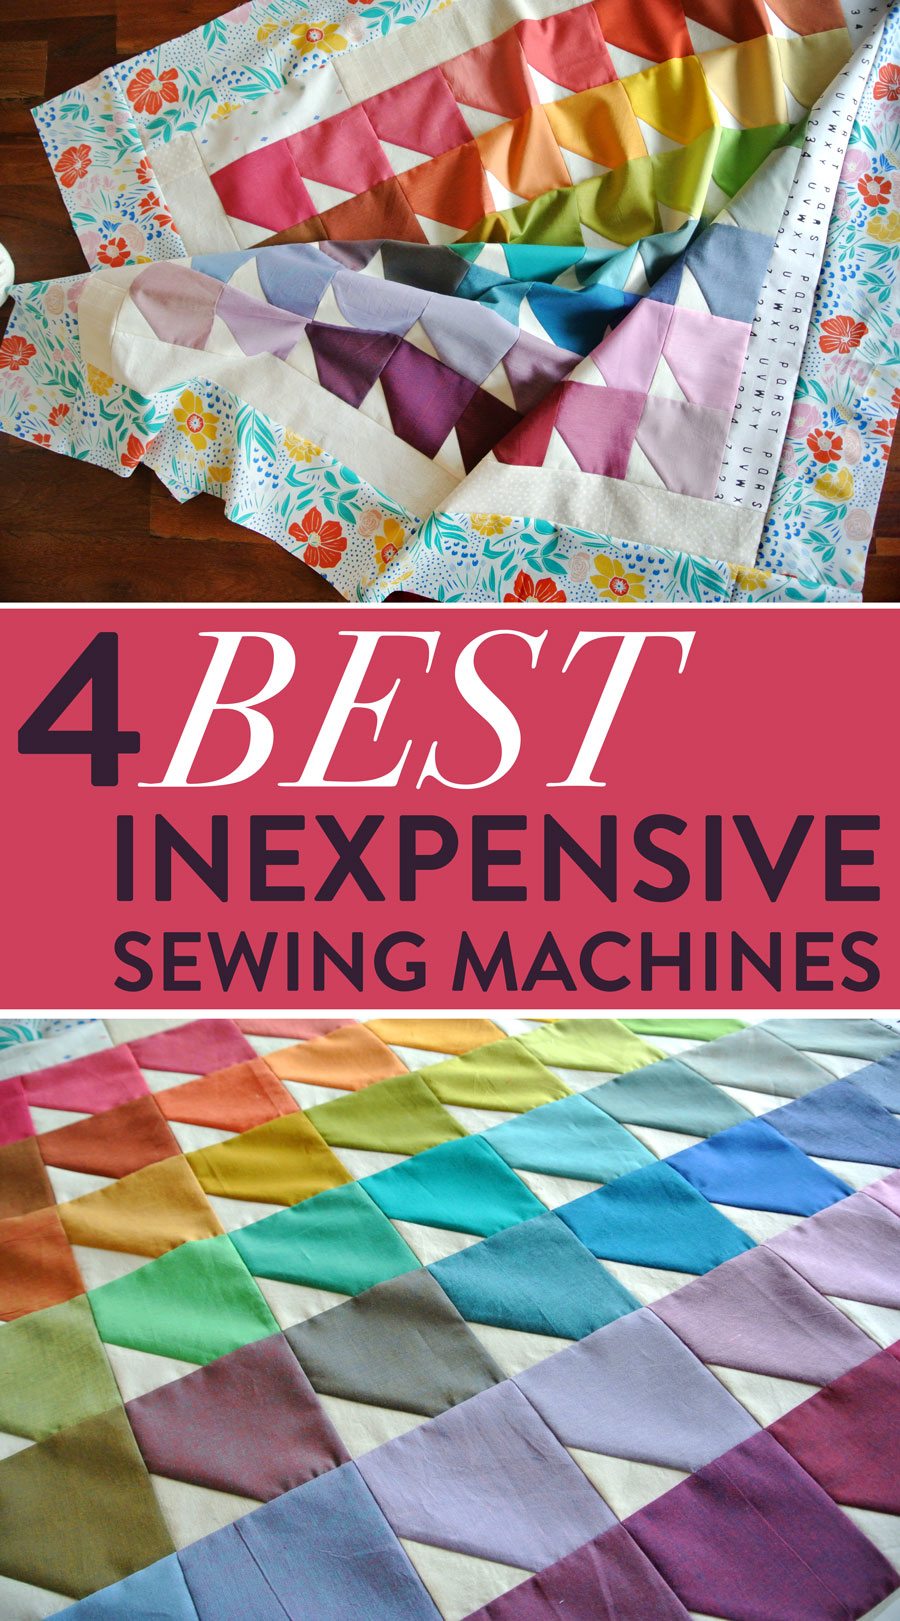 4-best-inexpensive-sewing-machines